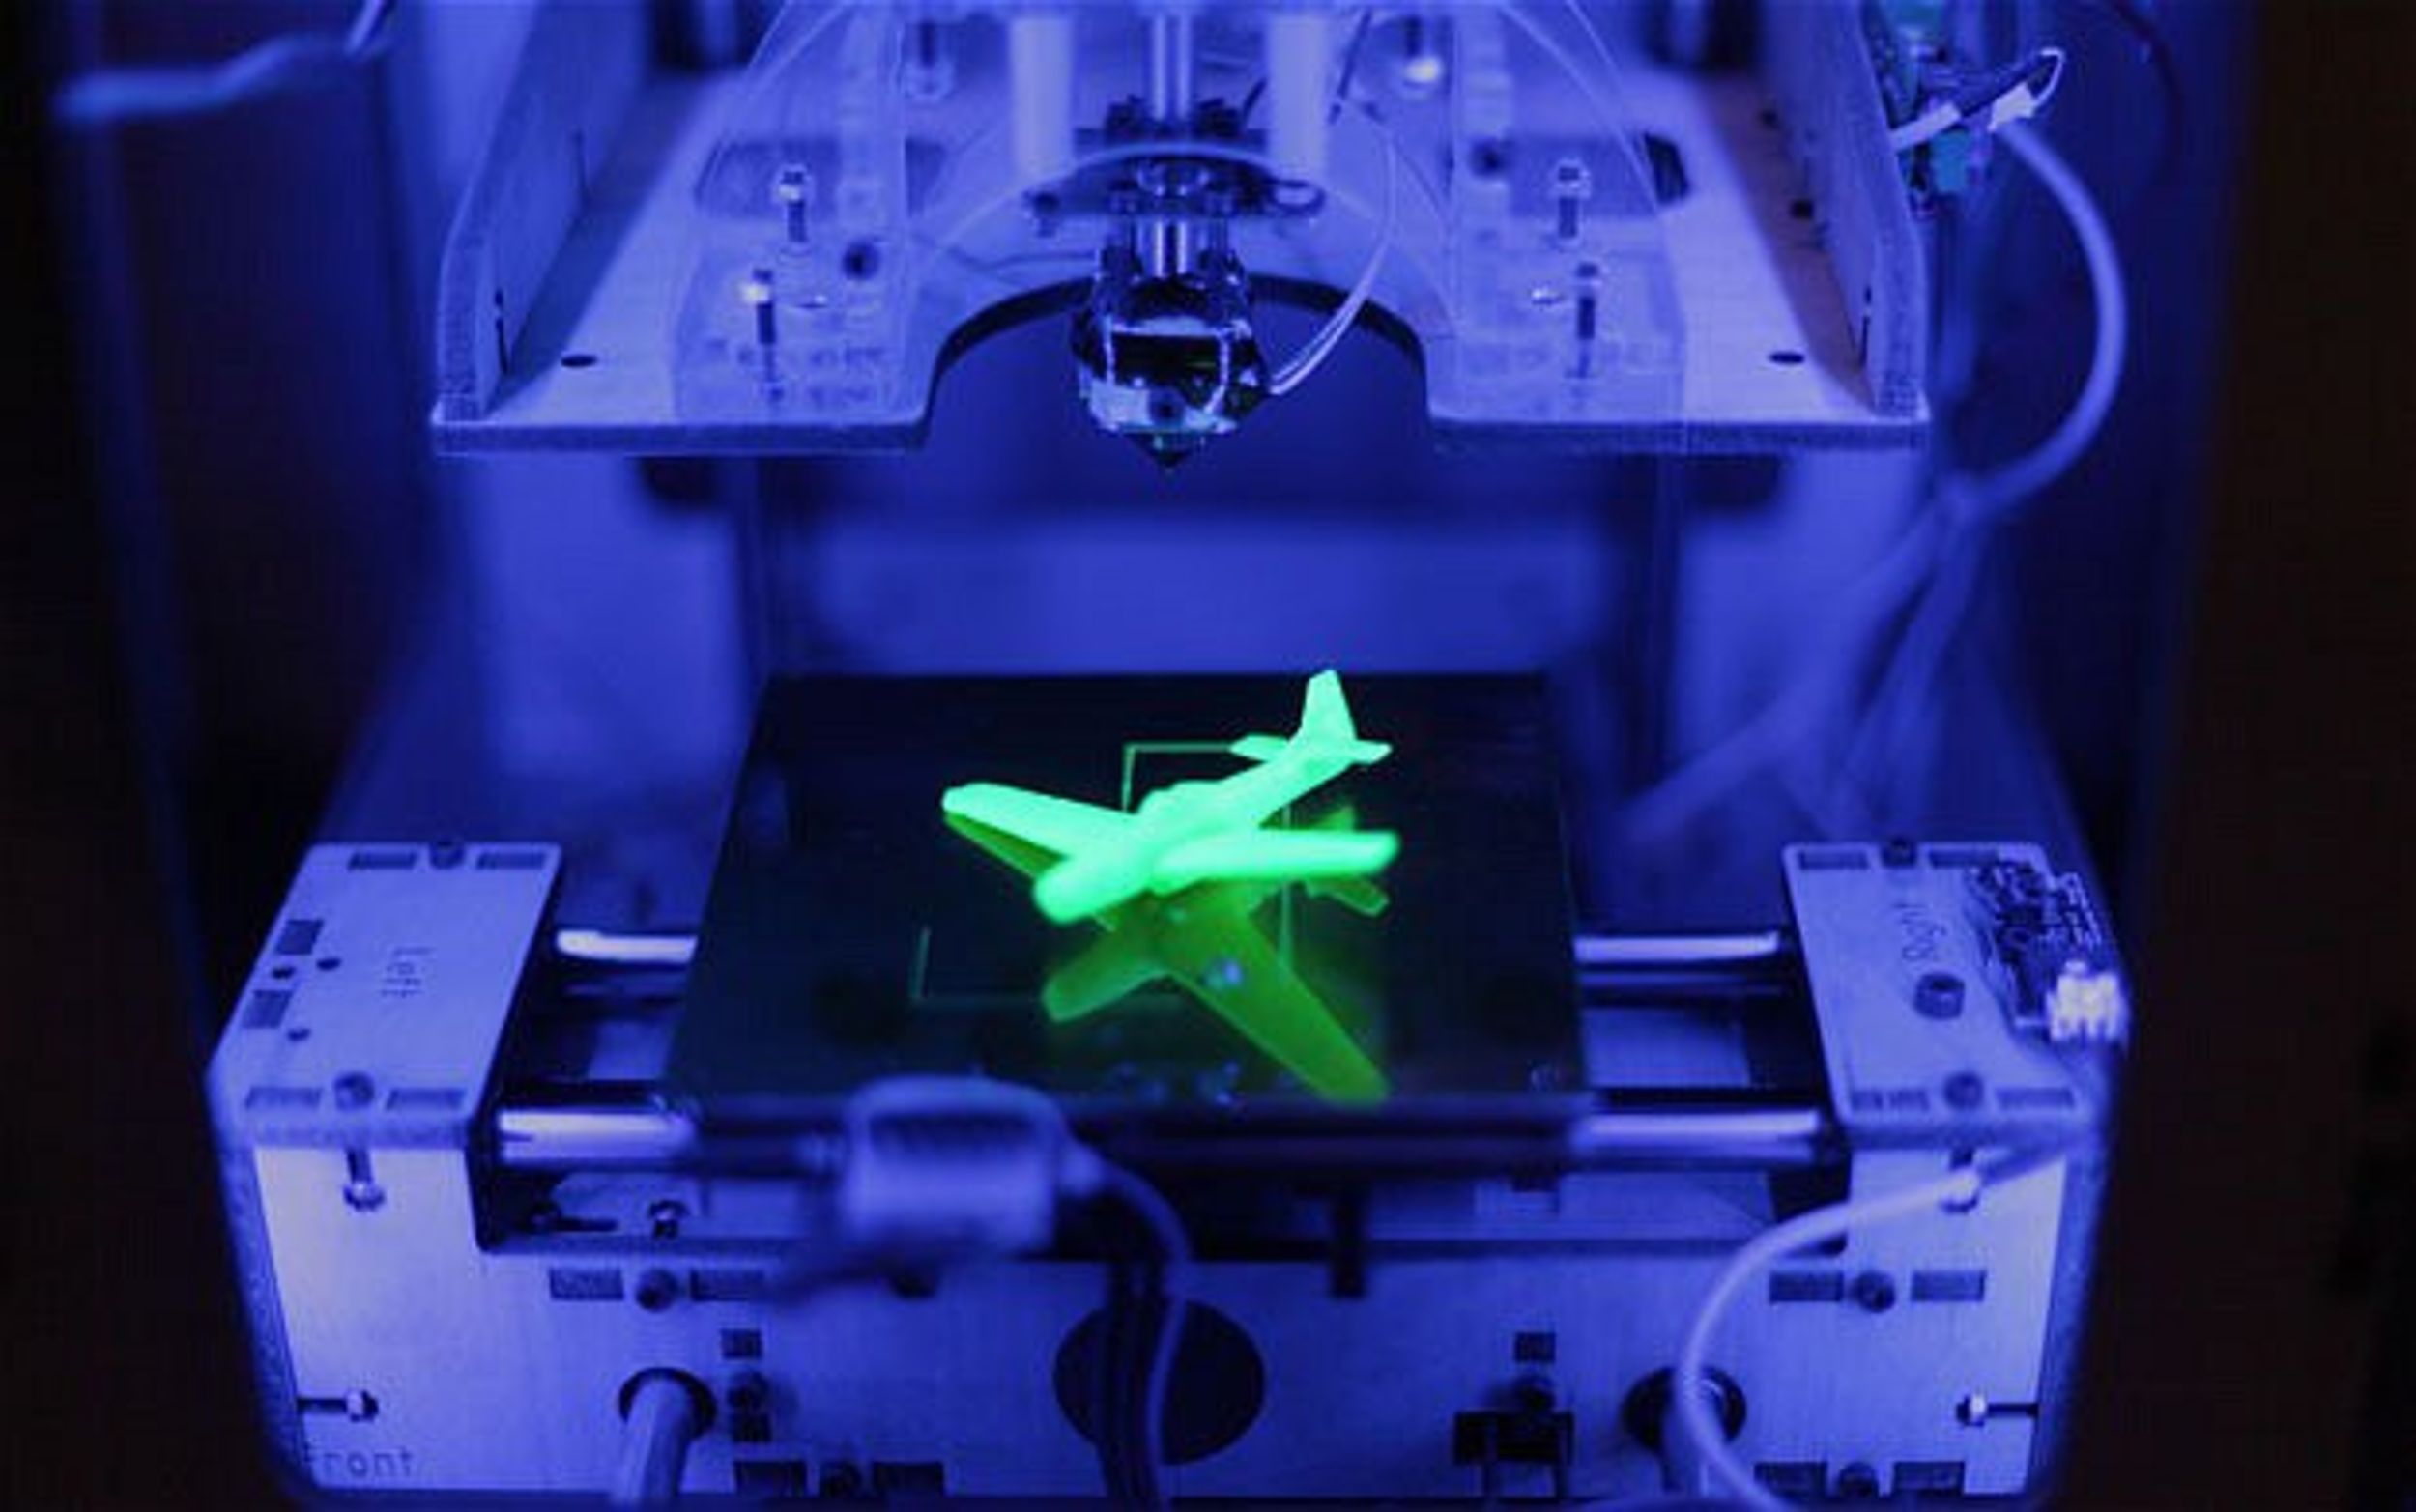 3D Printing: The Good And The Bad